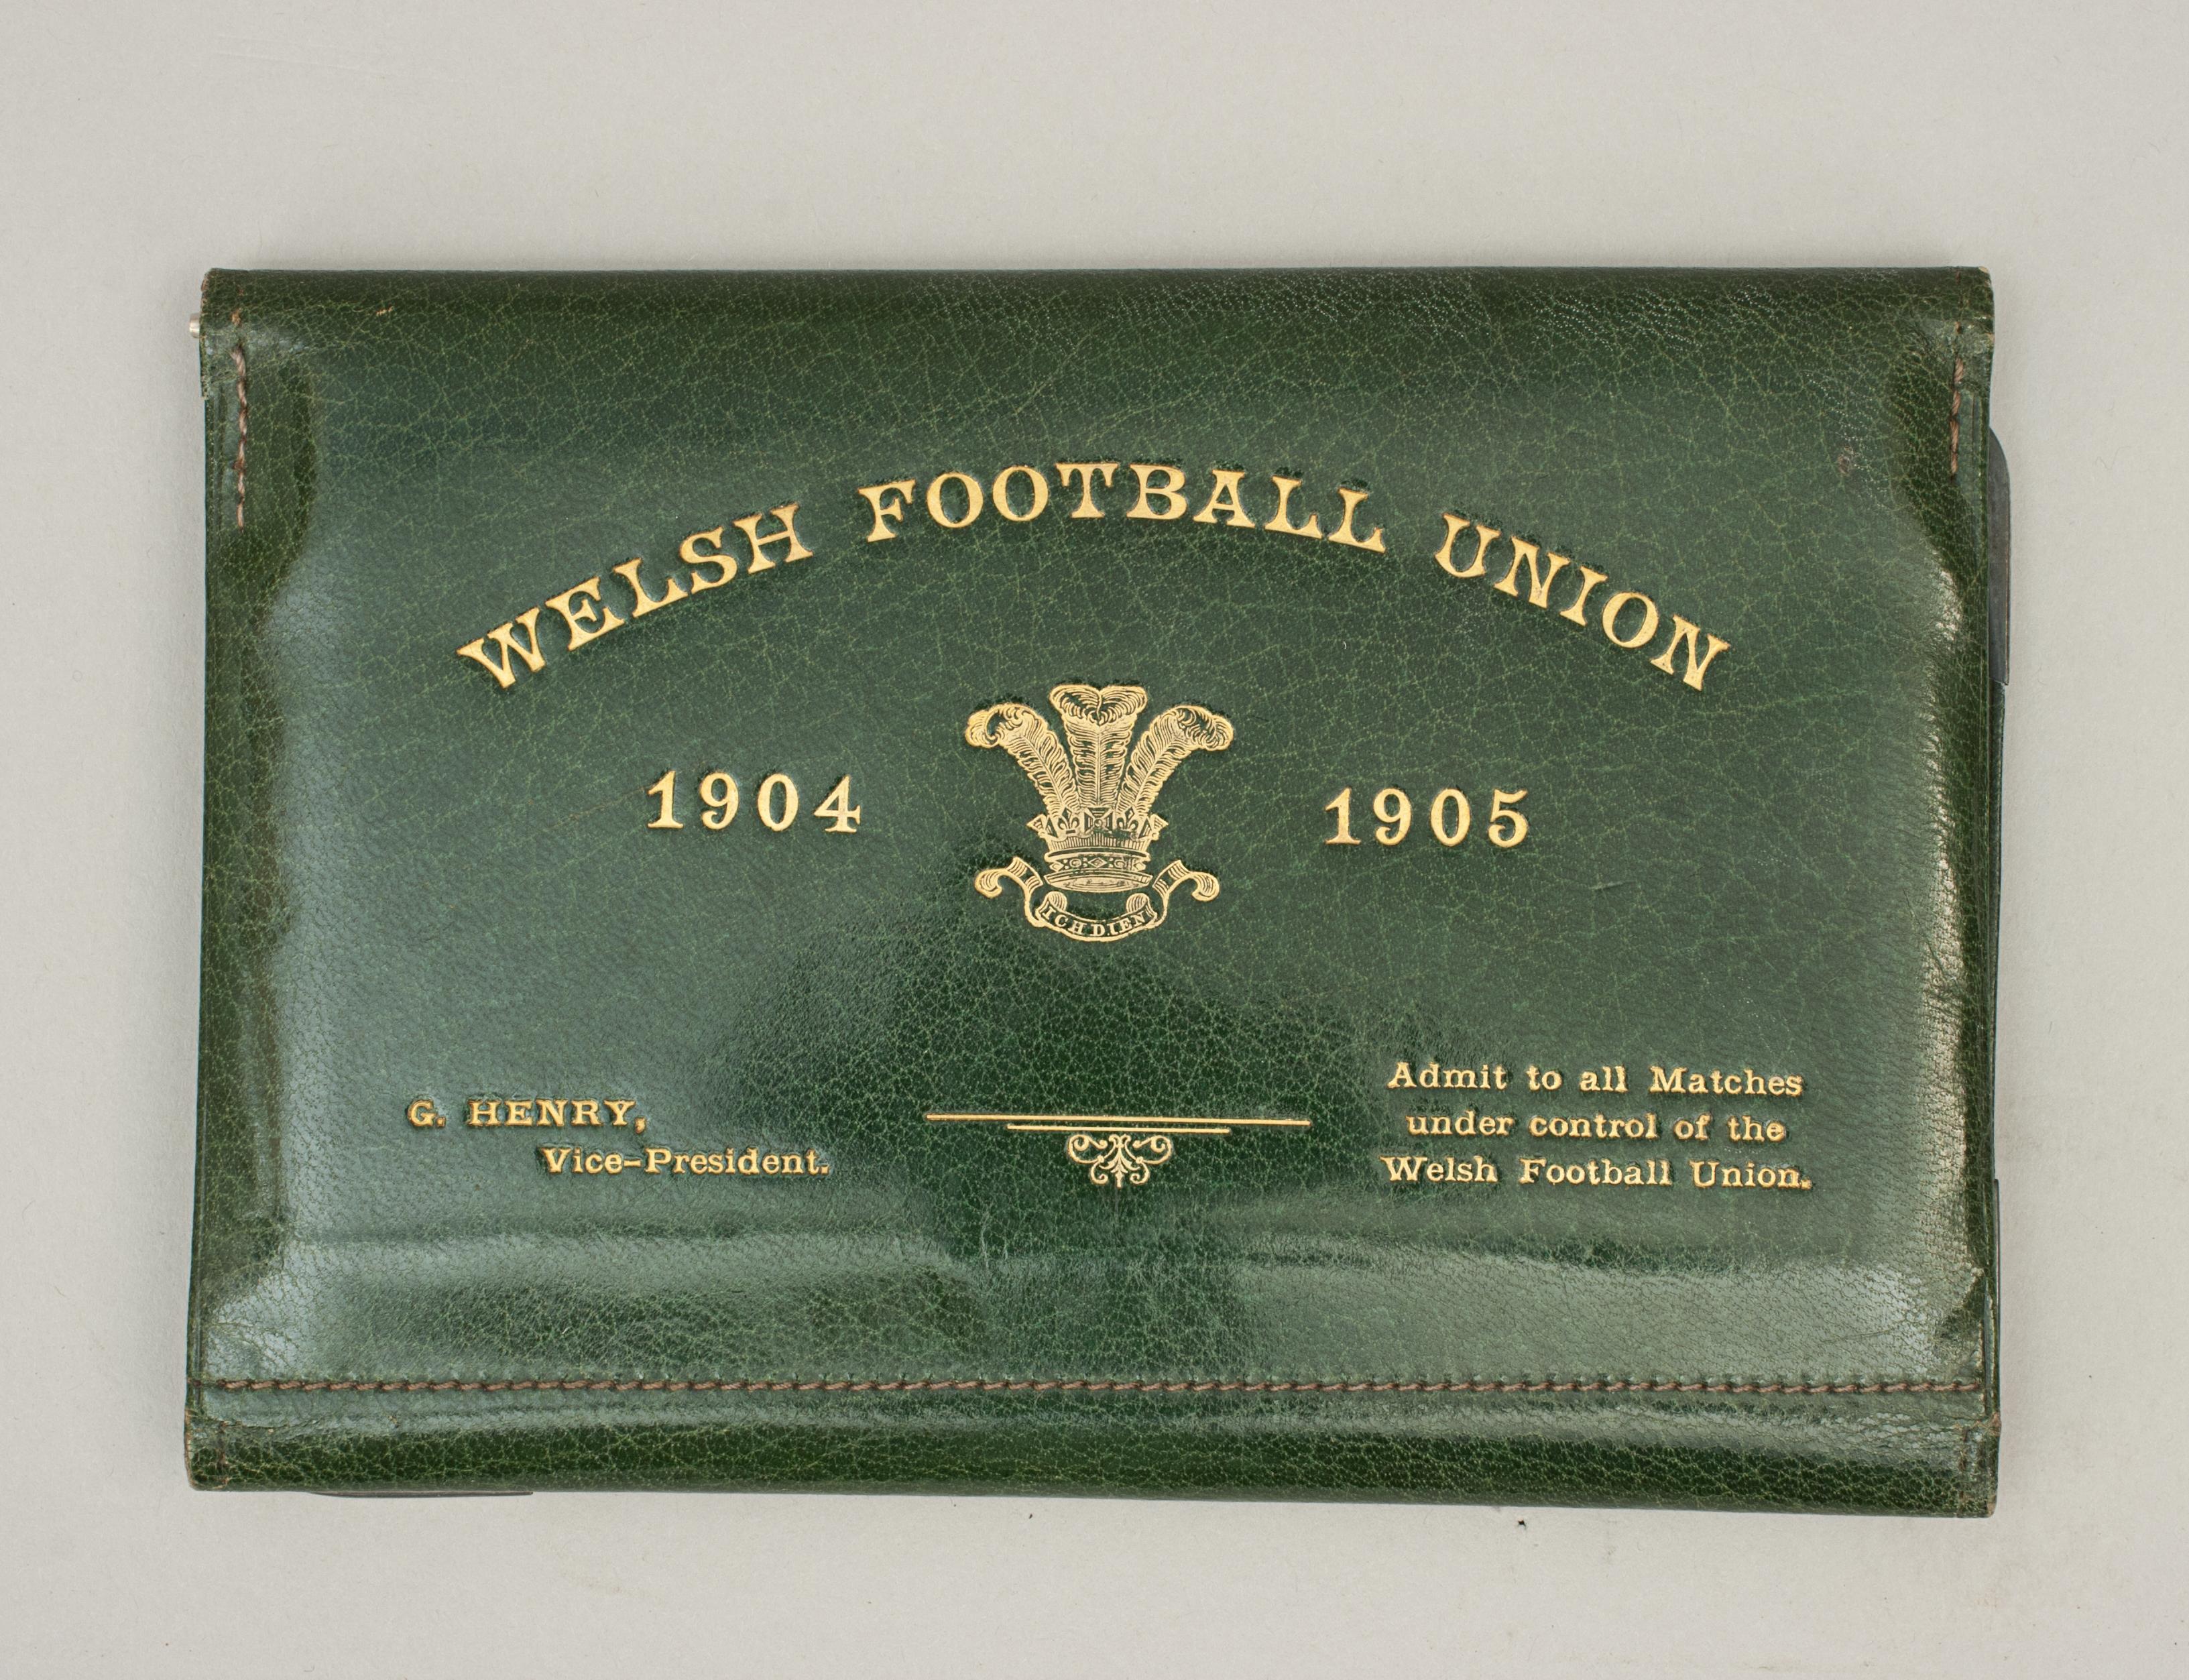 Late 19th Century Welsh Rugby Union Tickets and Lapel Pin, Welsh Football Union For Sale